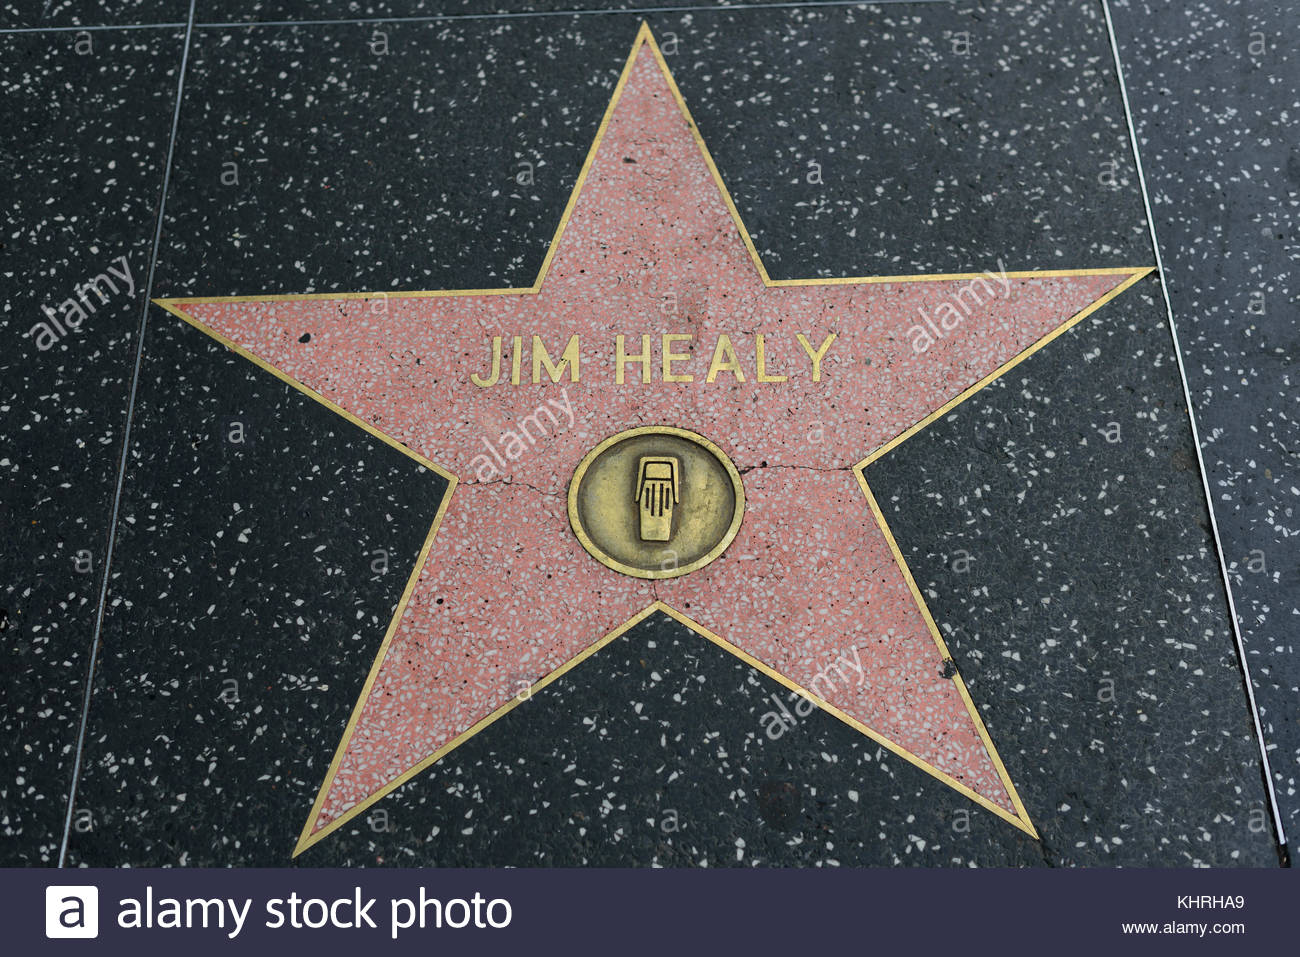 hollywood-ca-december-06-jim-healy-star-on-the-hollywood-walk-of-fame-KHRHA9